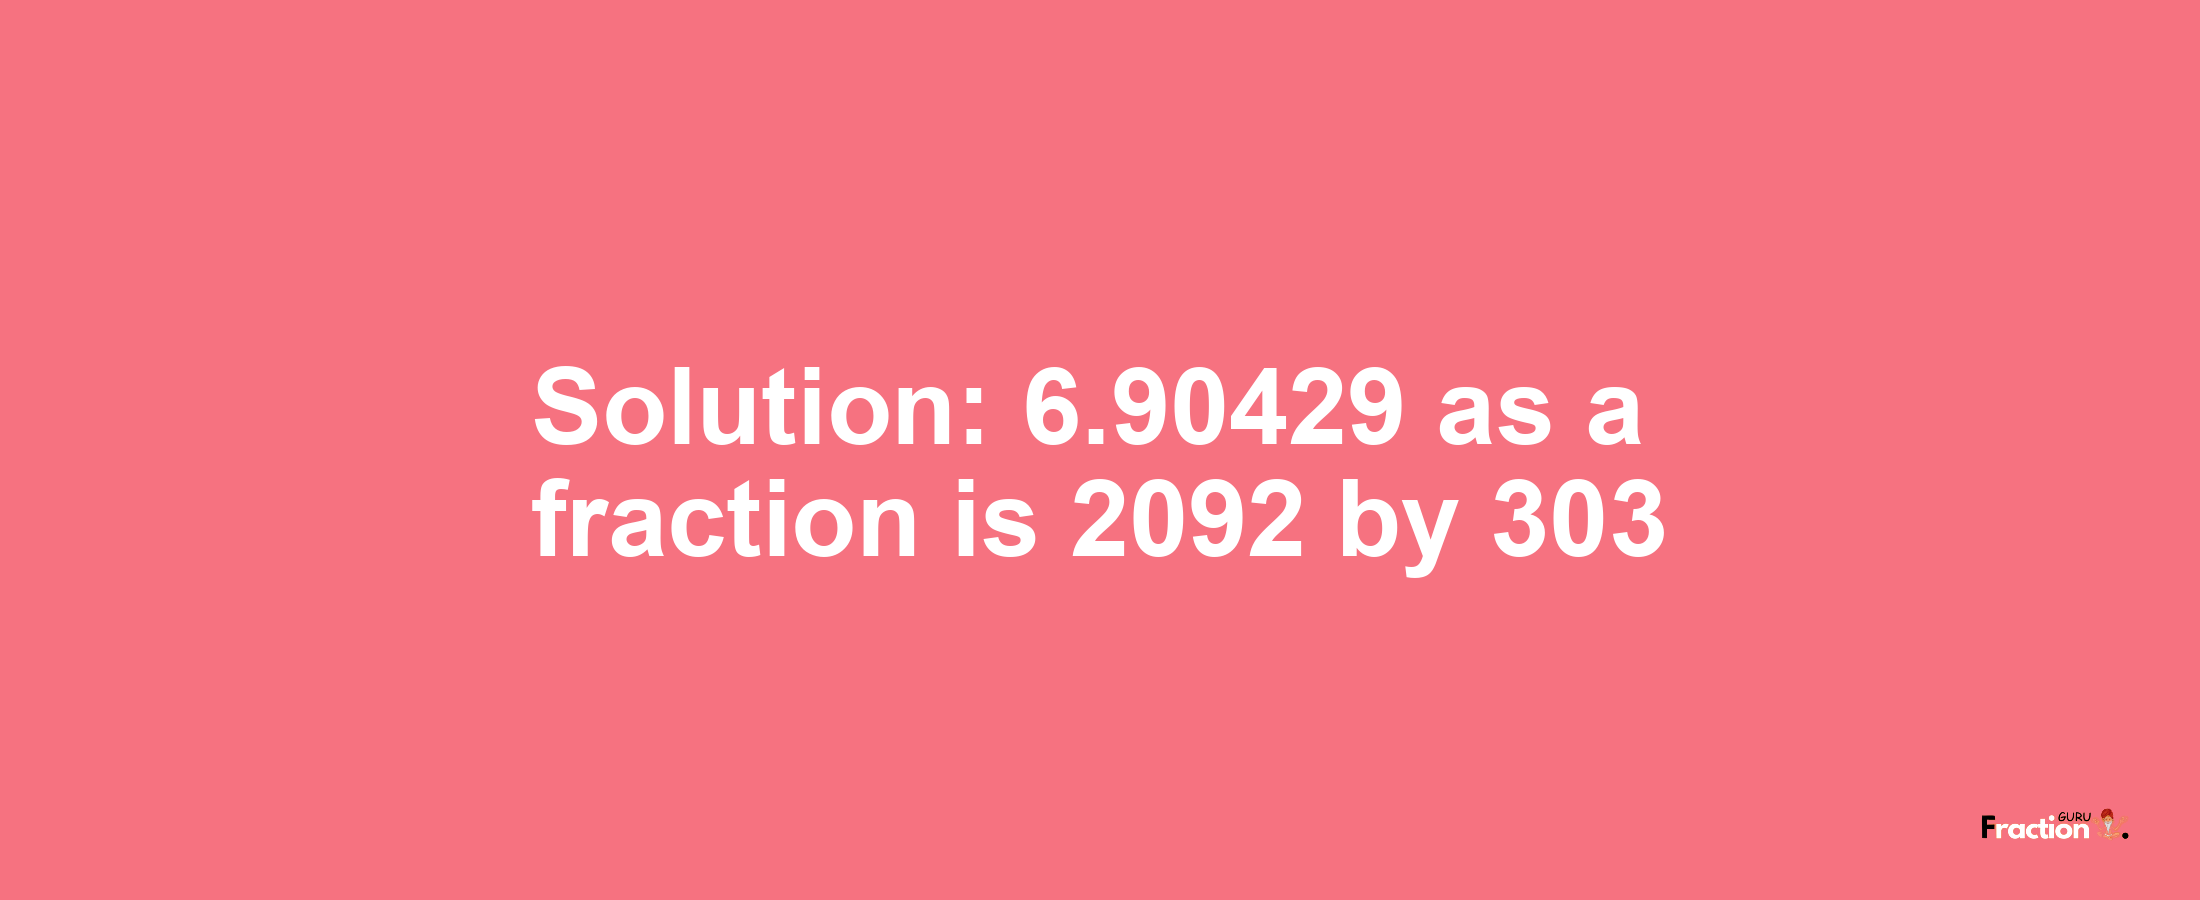 Solution:6.90429 as a fraction is 2092/303